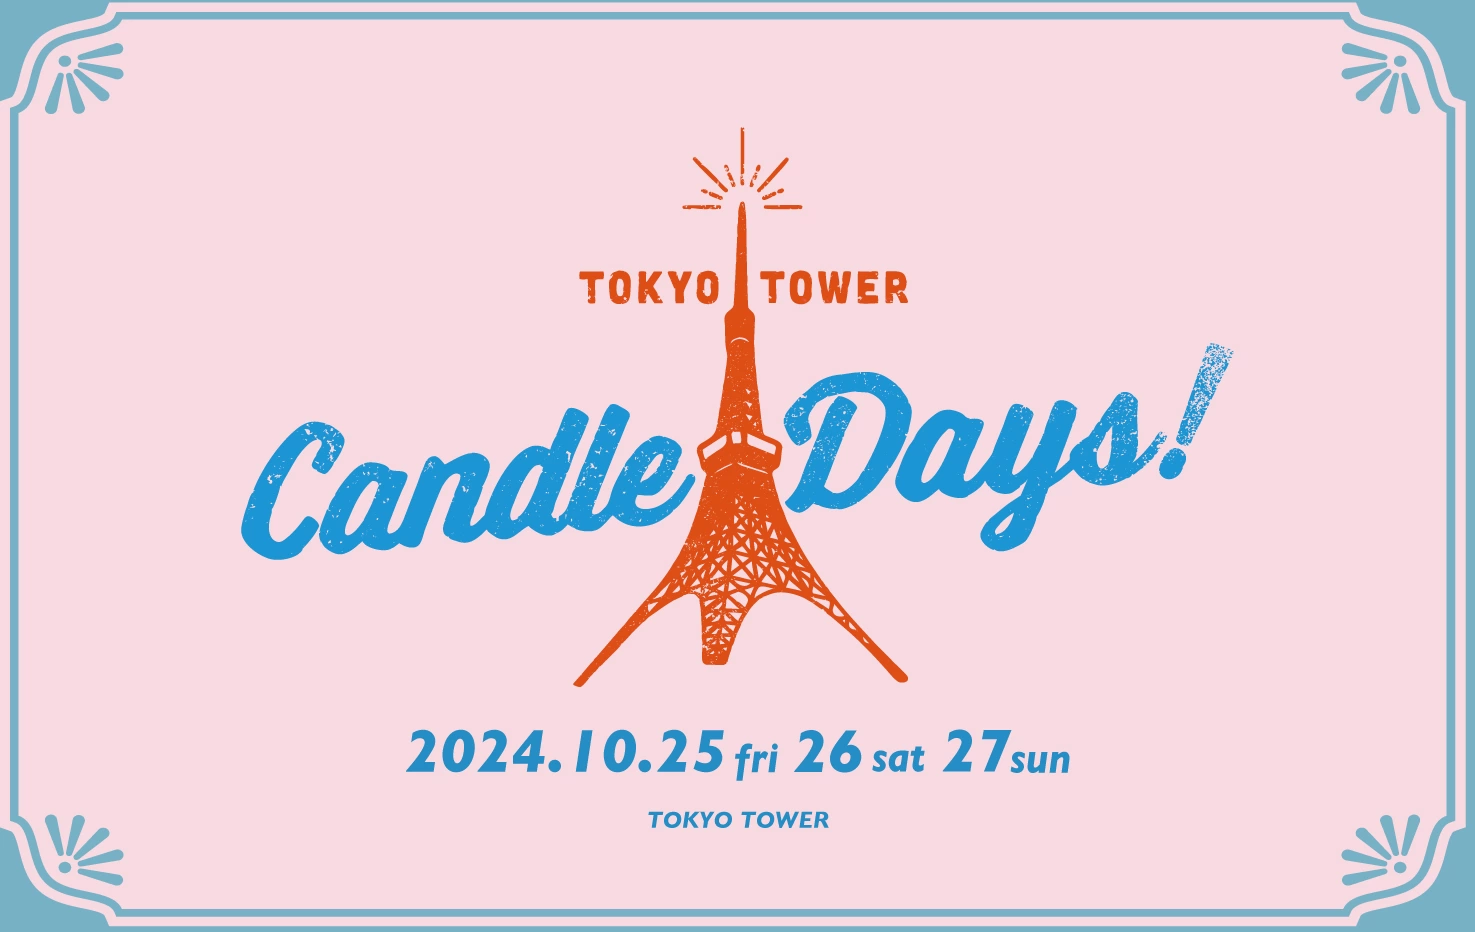 TOKYO TOWER CANDLE DAYS 2024